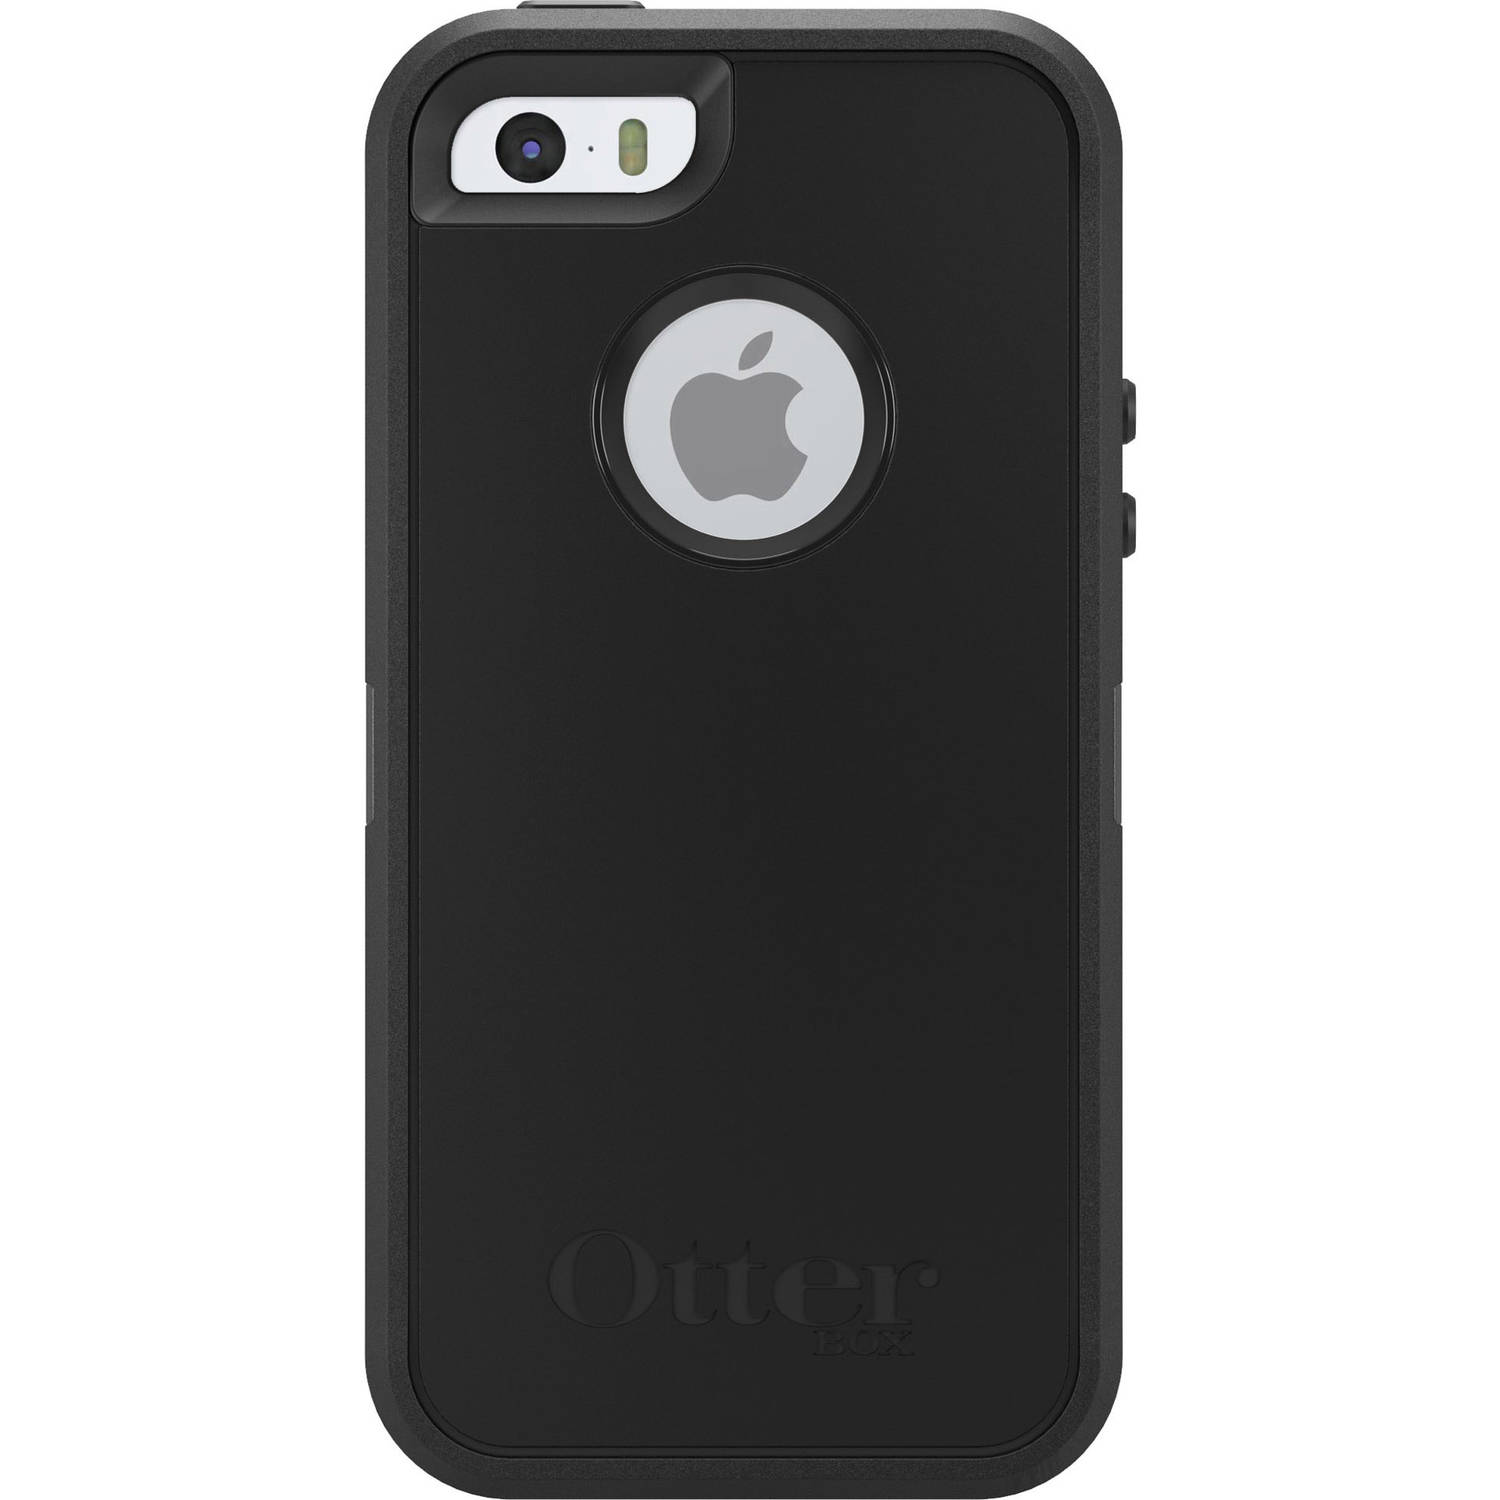 iPhone 5/5SE/5S Otterbox apple iphone case defender series - image 1 of 12